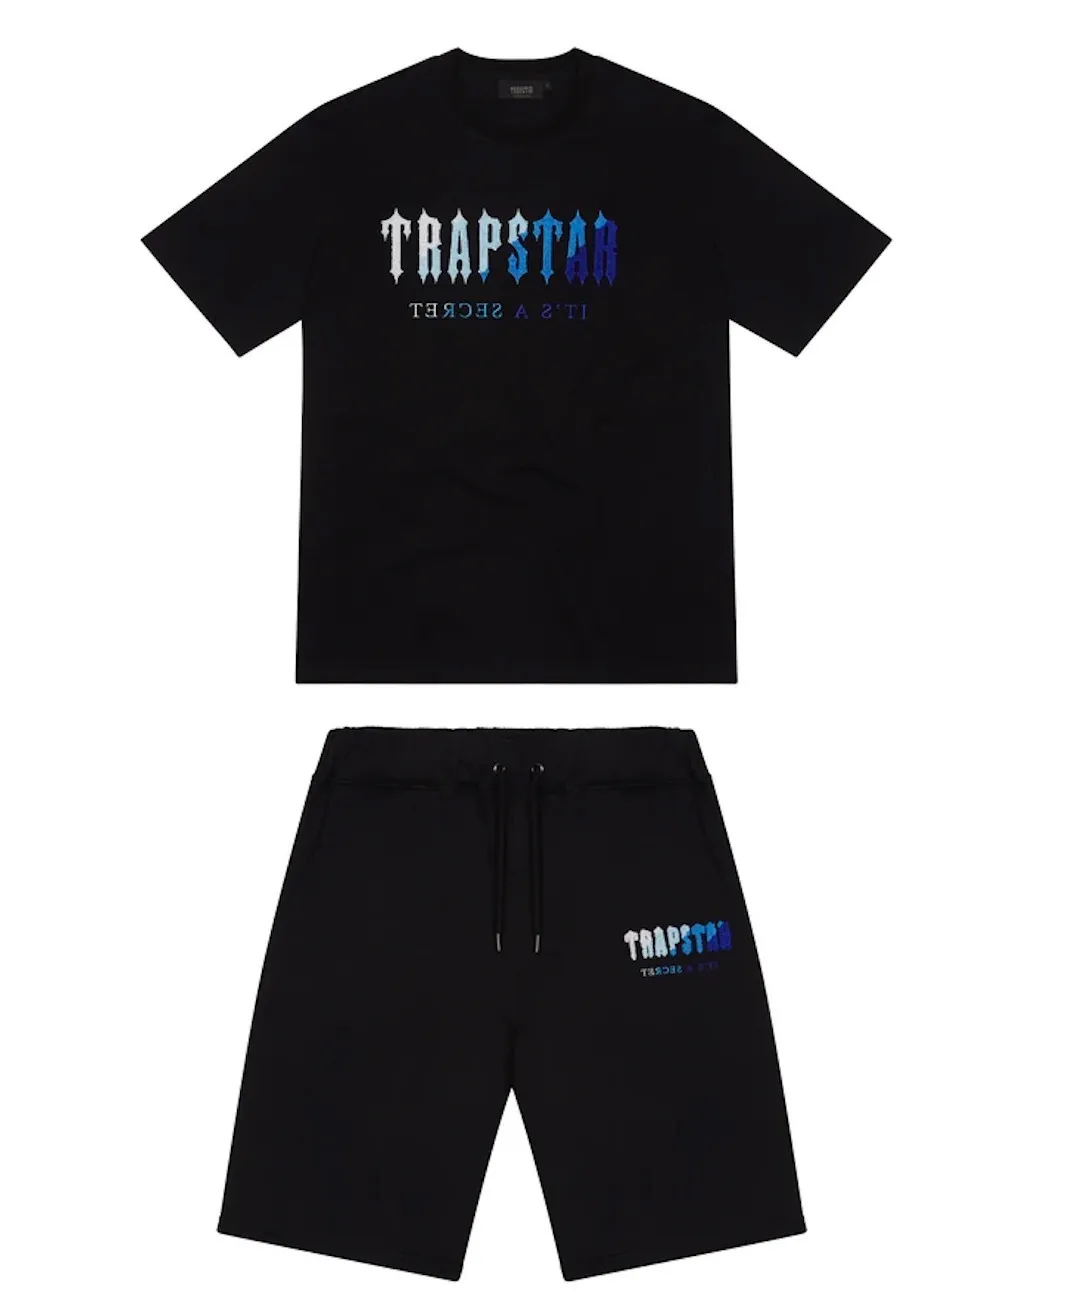 Mens Trapstar camise